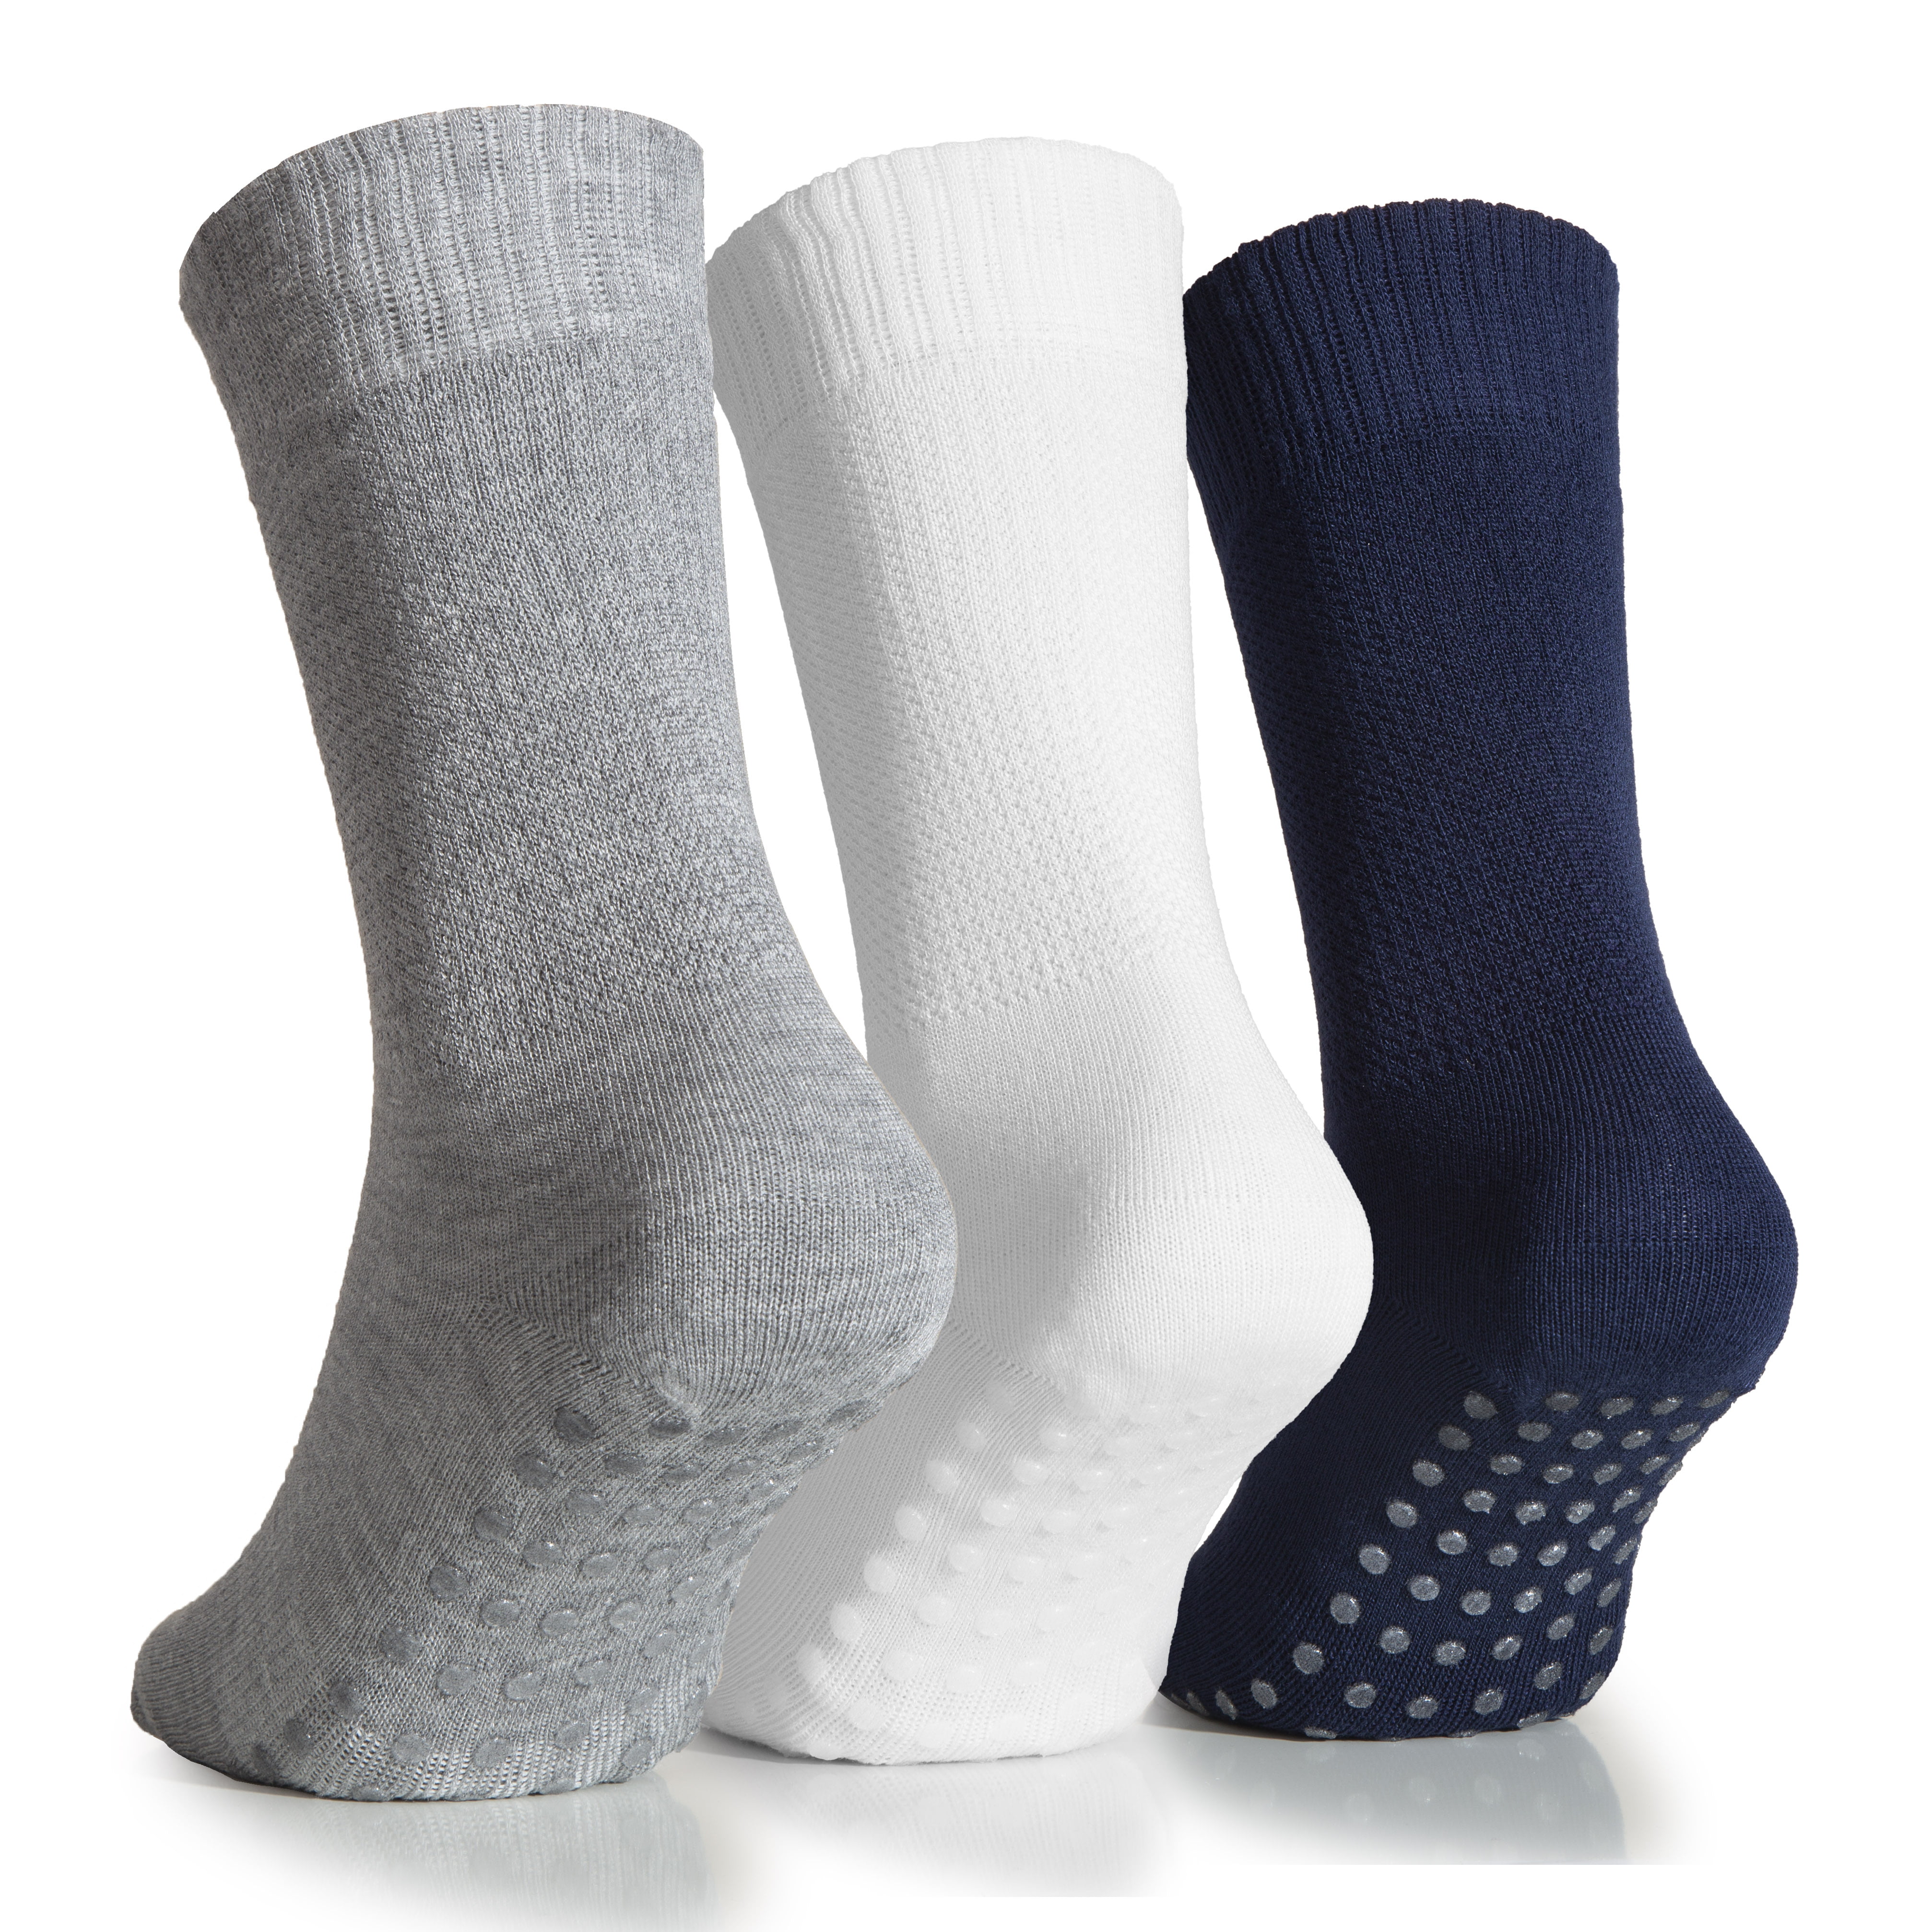 LADIES BAMBOO EXTRA WIDE TOP NON ELASTIC SOCKS PERFECT FOR SWOLLEN FEET DIABETIC 